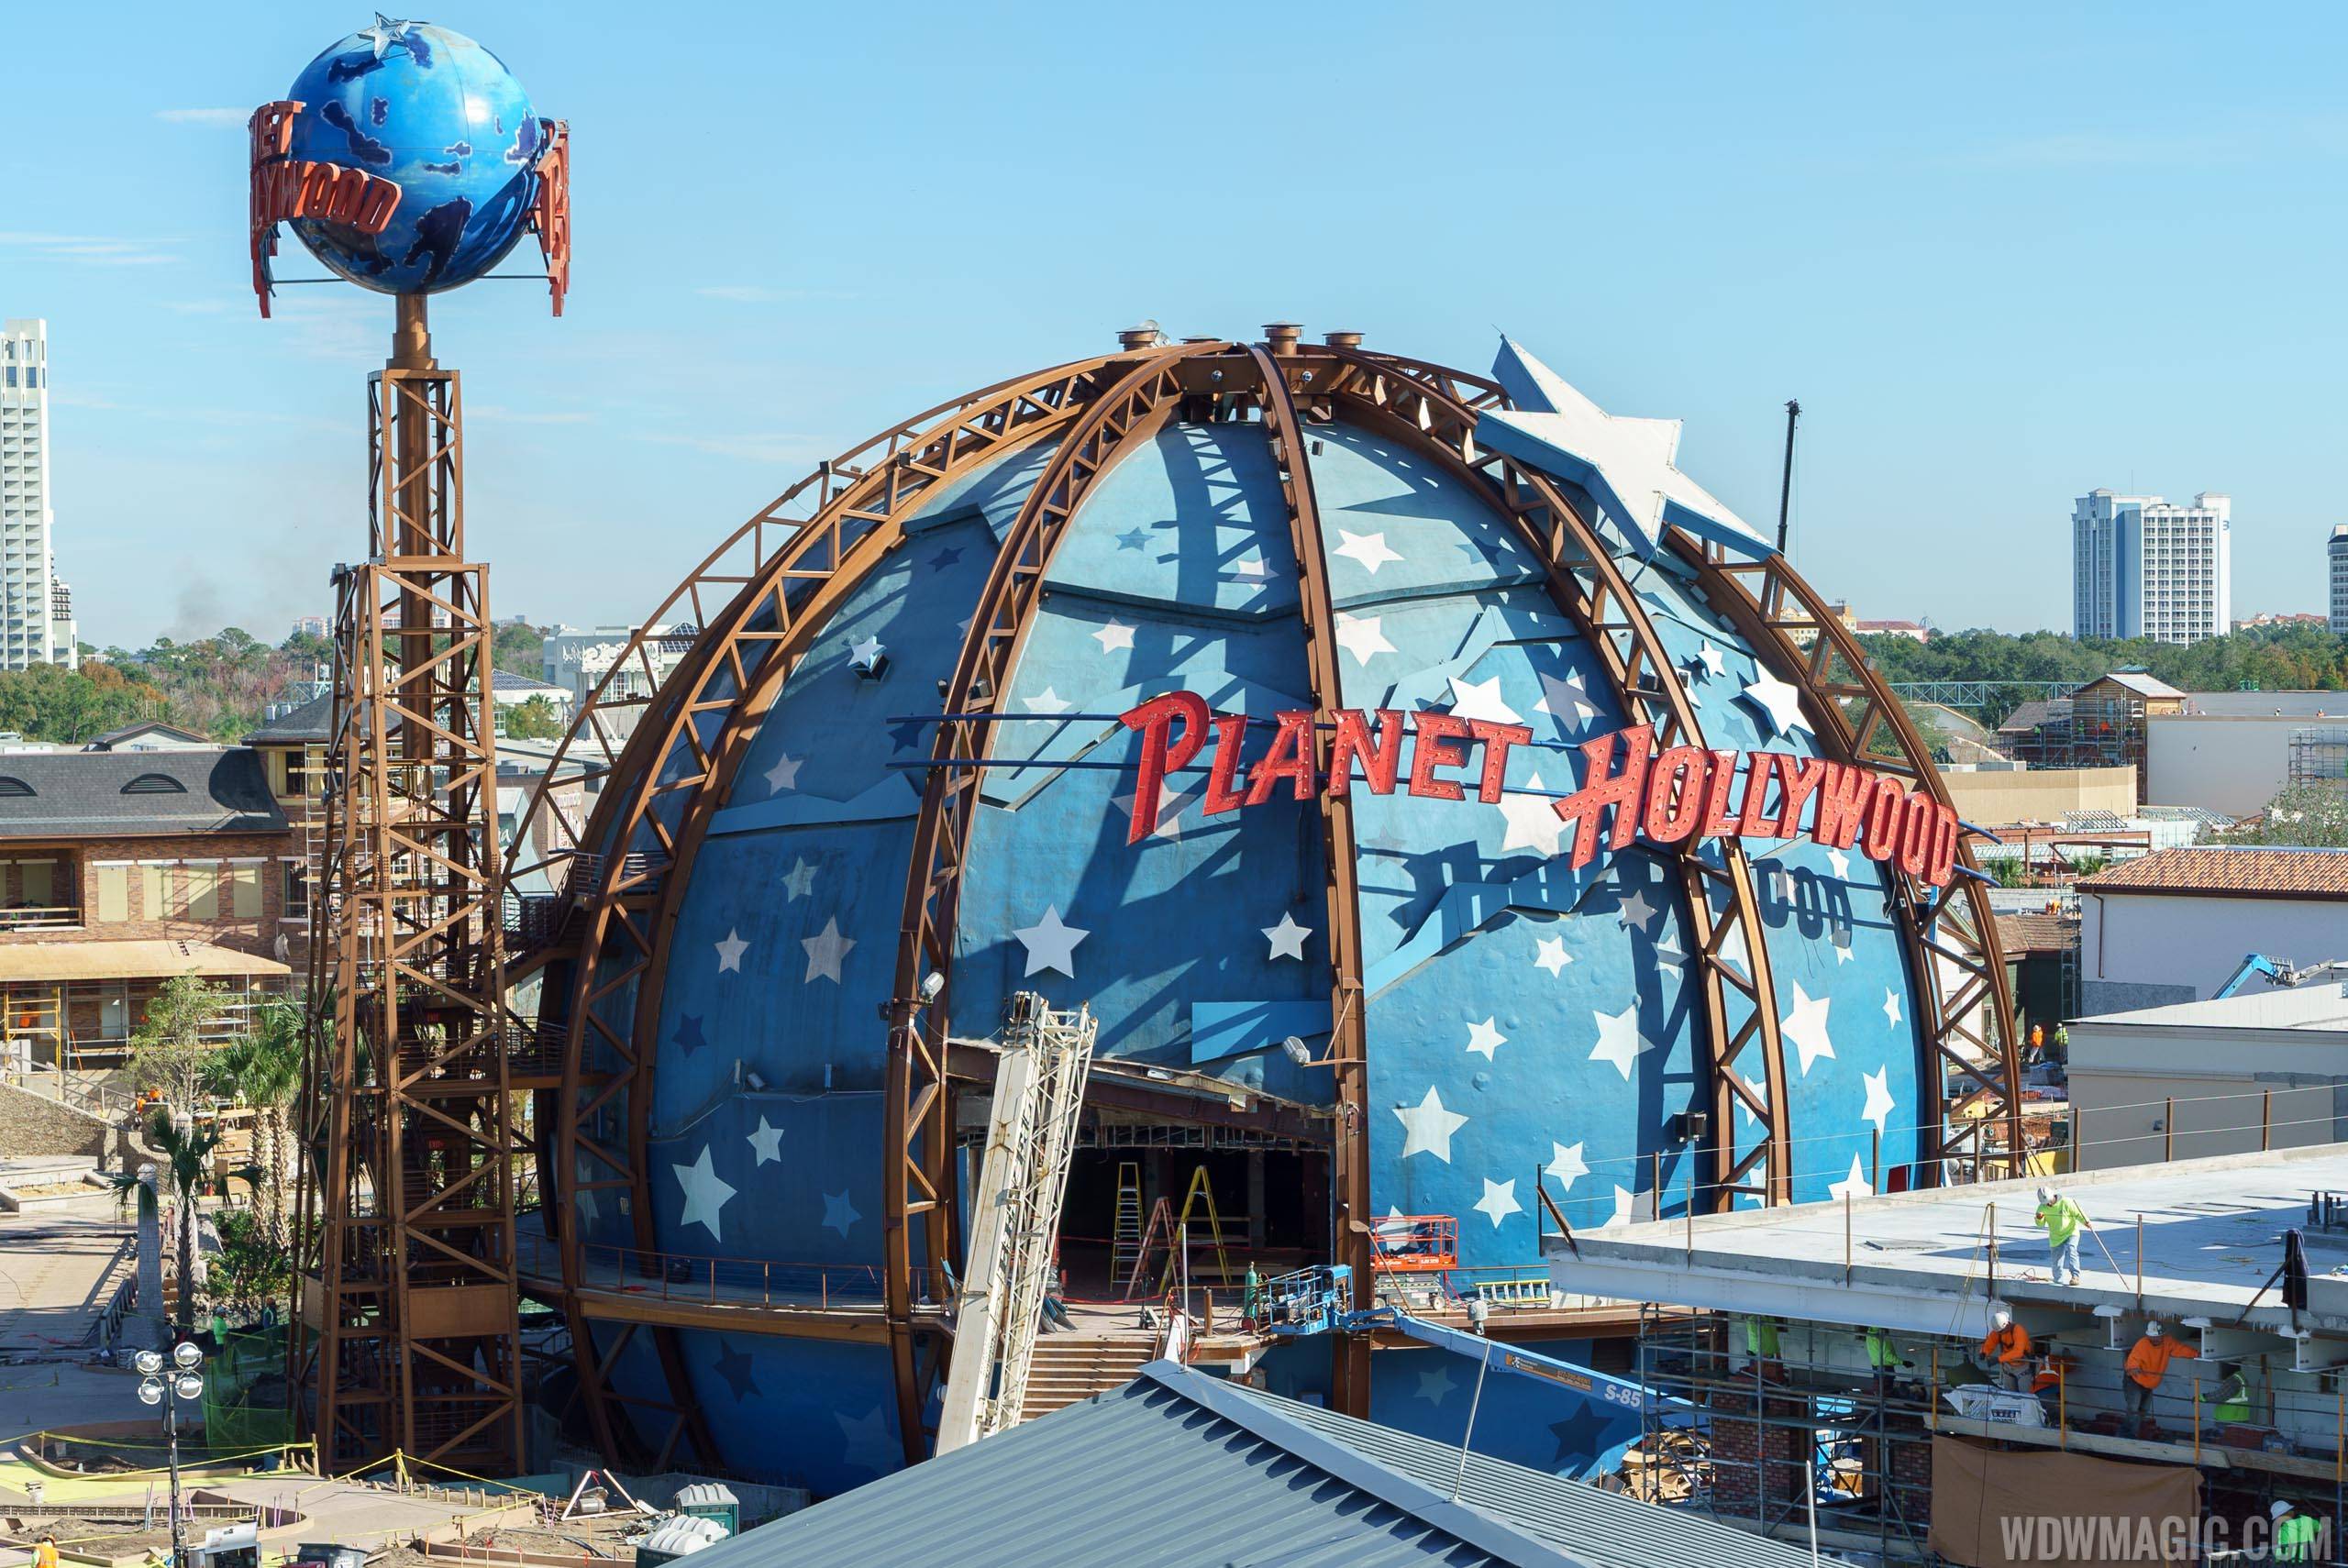 PHOTOS - Planet Hollywood begins transformation into the Observatory at Disney Springs